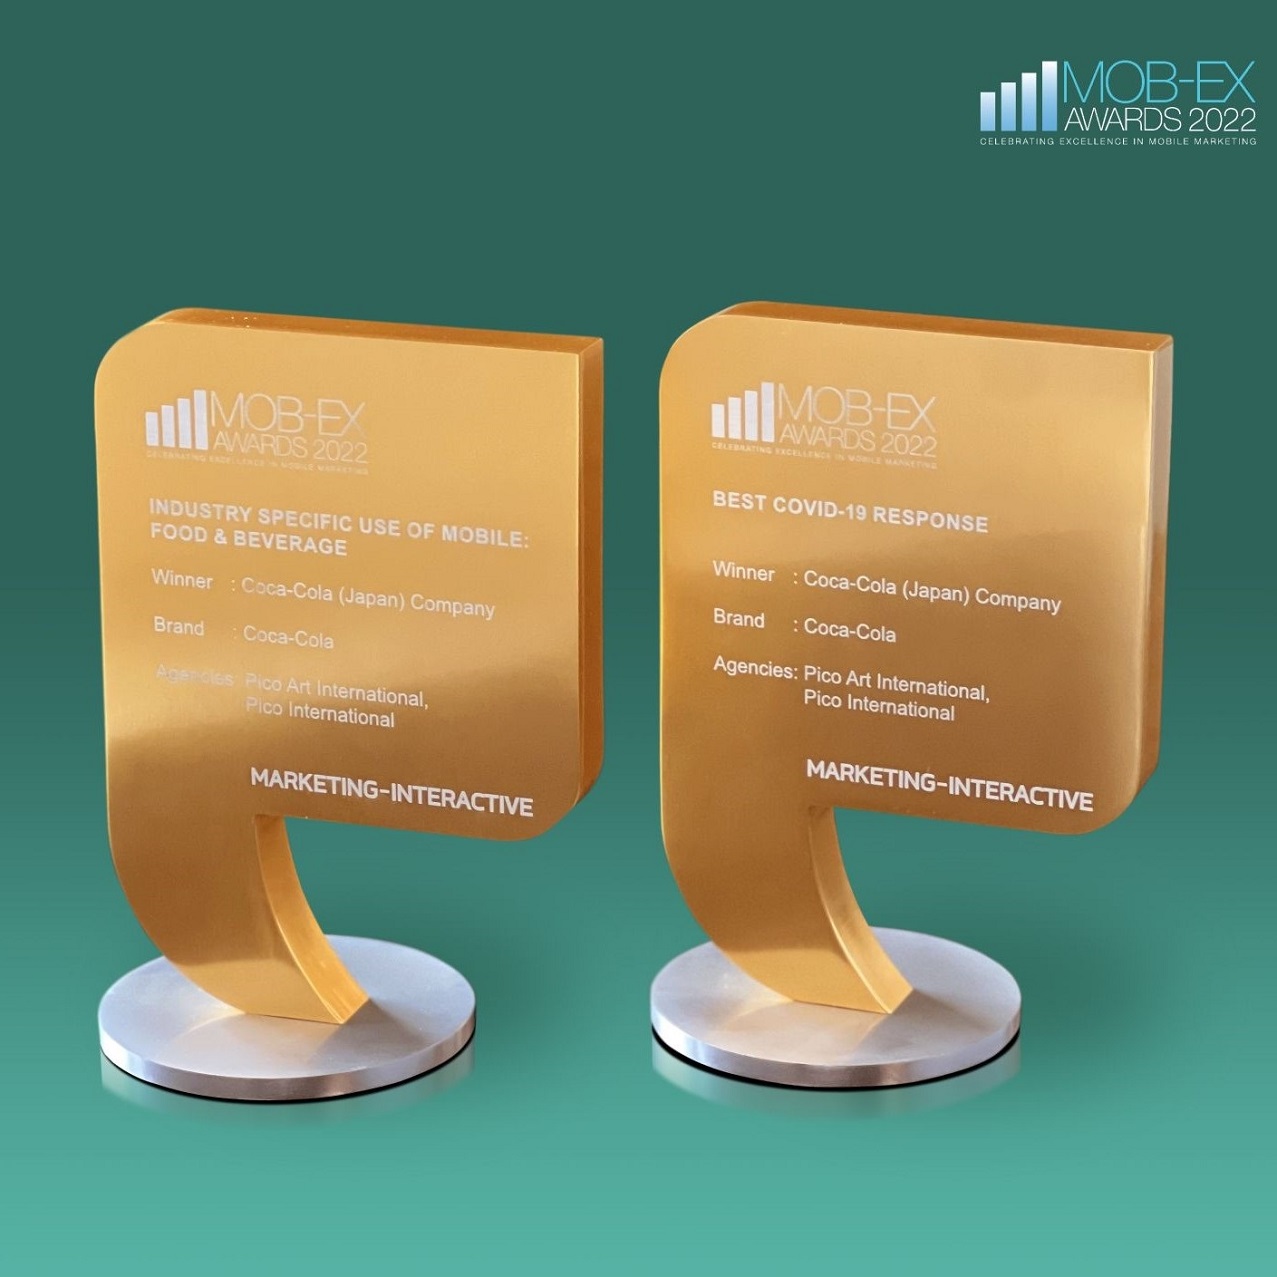 Marketing Interactives Mob Ex Awards 2022 in Singapore 2